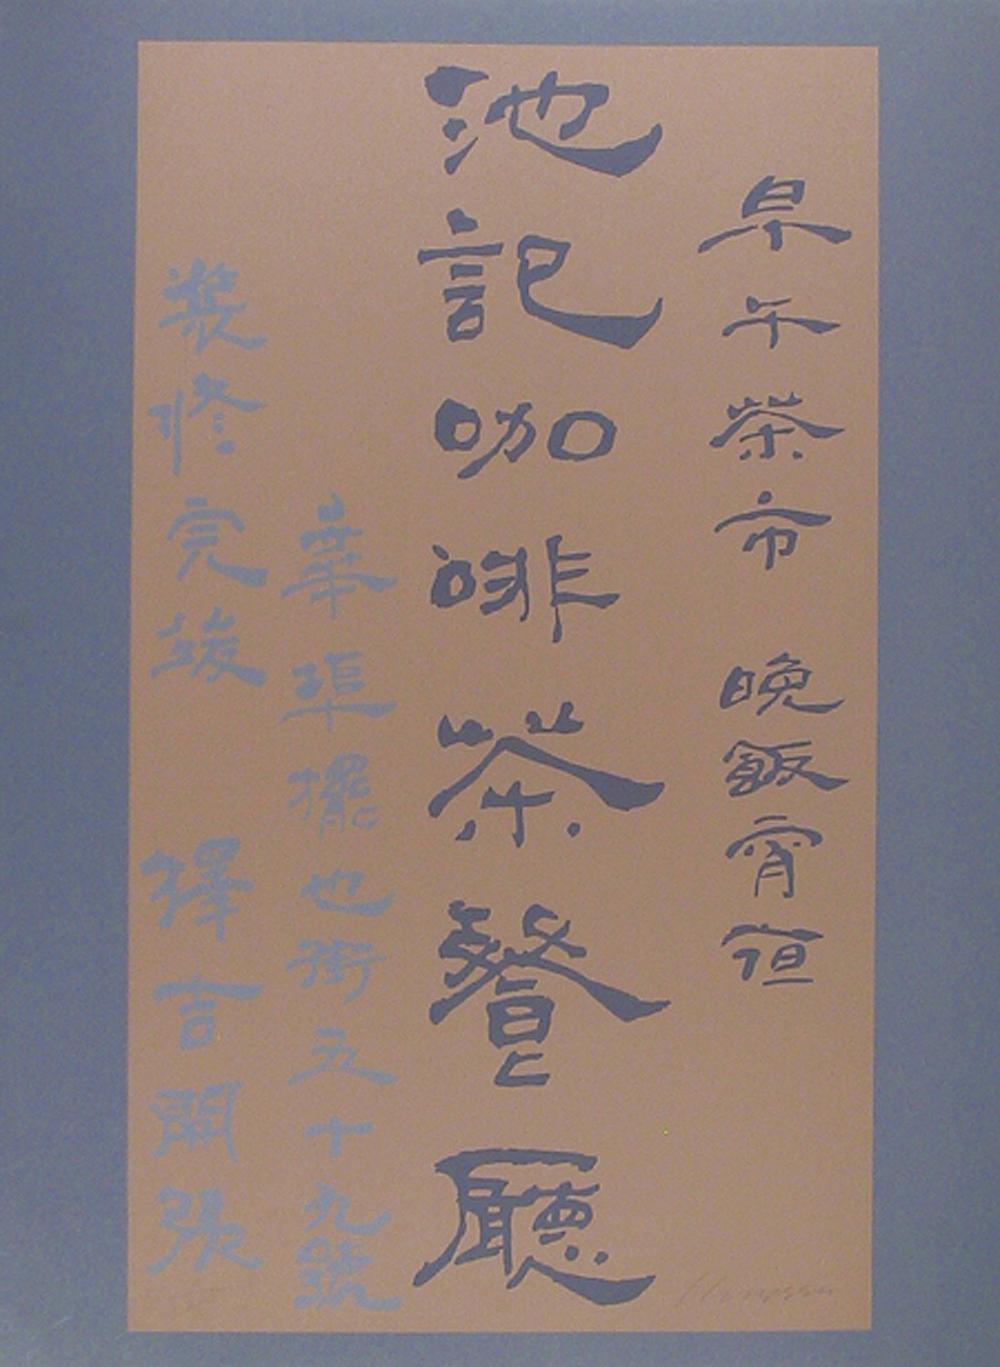 Chinese Characters, Silkscreen by Chryssa